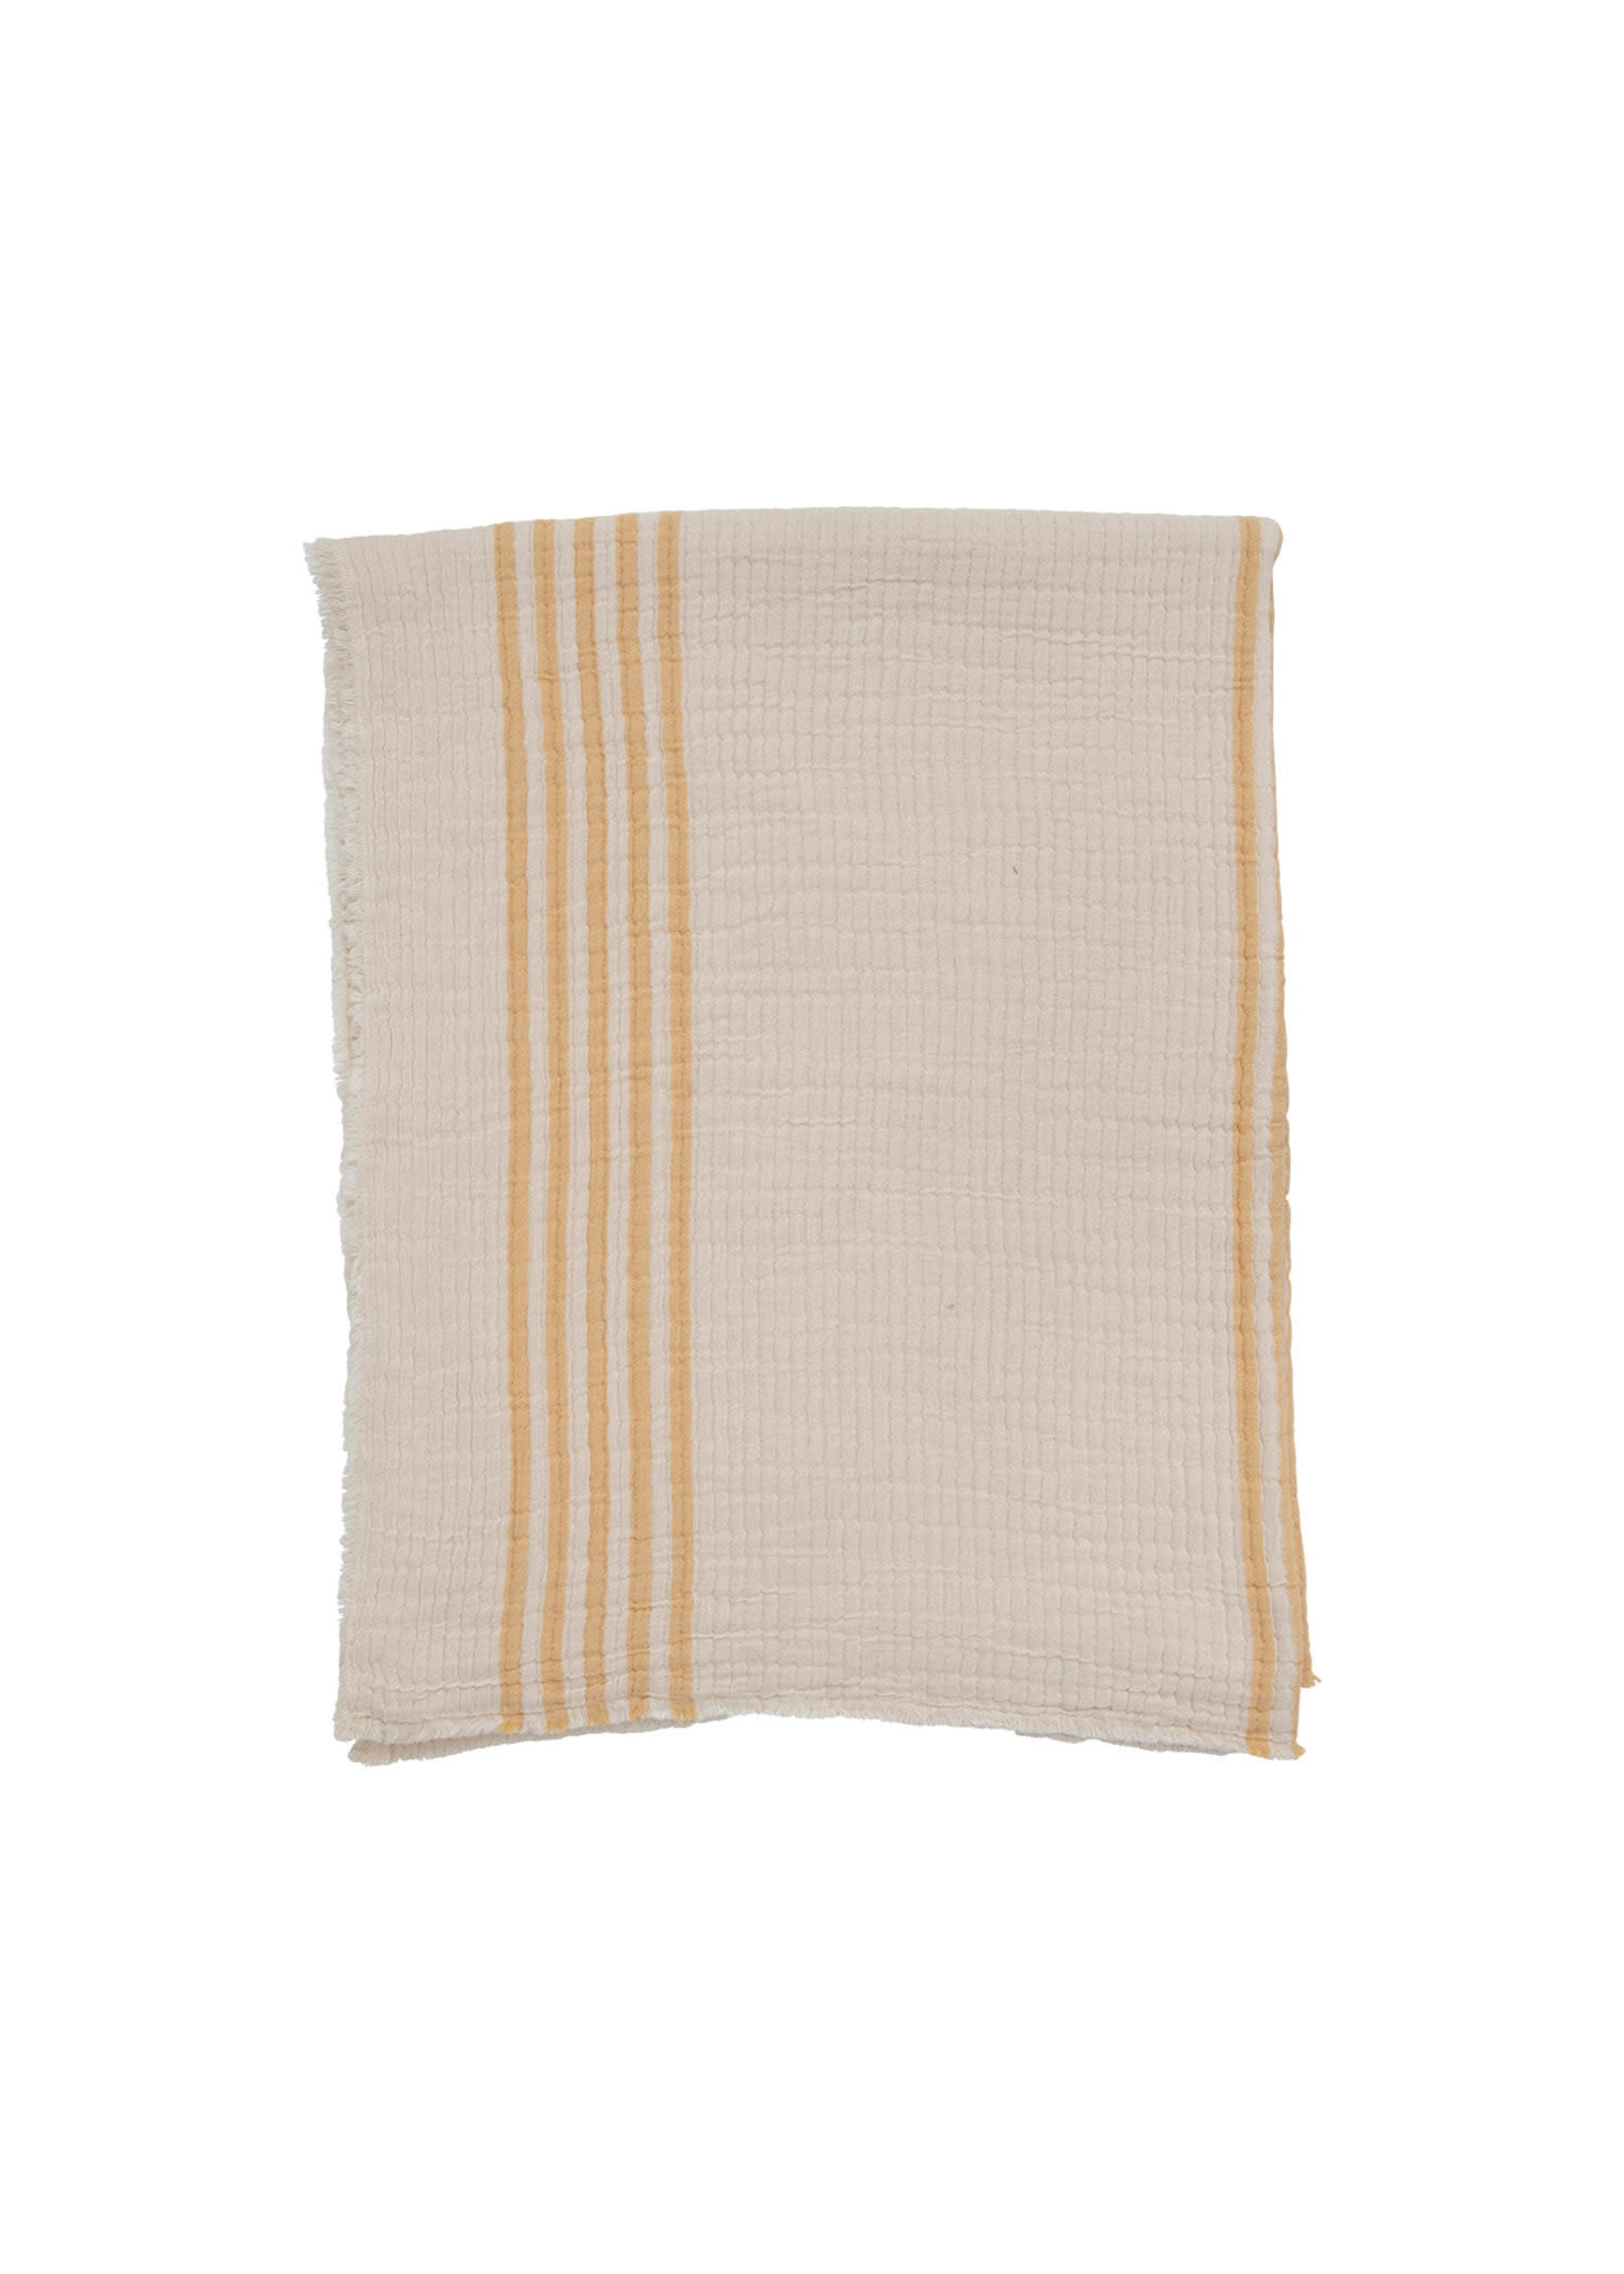 Cotton Double Cloth Stitched Throw with Stripes and Frayed Edges